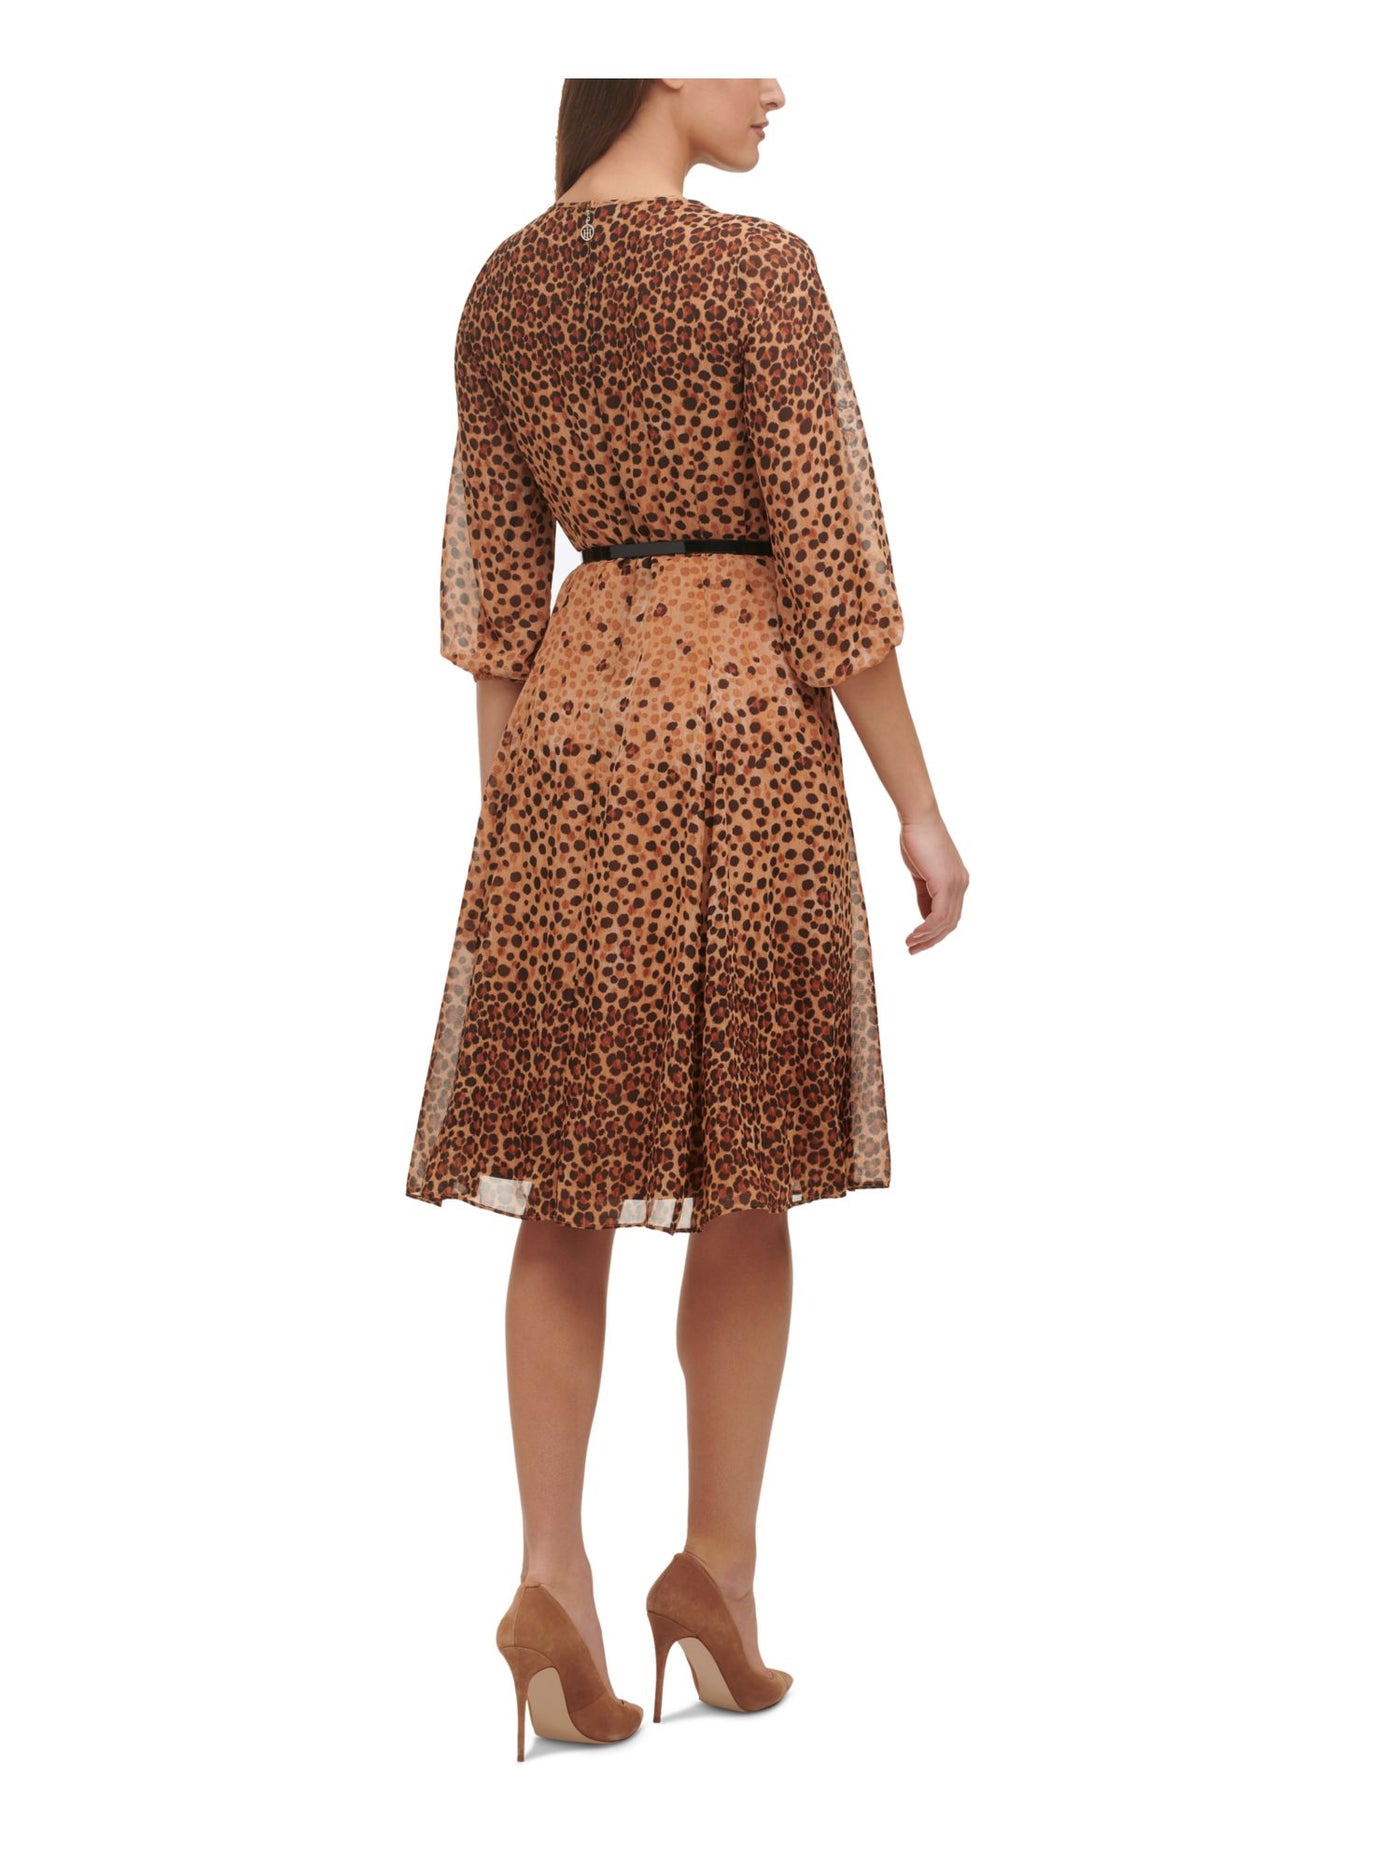 TOMMY HILFIGER Womens Brown Zippered Belted Sheer Lined Animal Print Balloon Sleeve Tie Neck Above The Knee Wear To Work Fit + Flare Dress 6